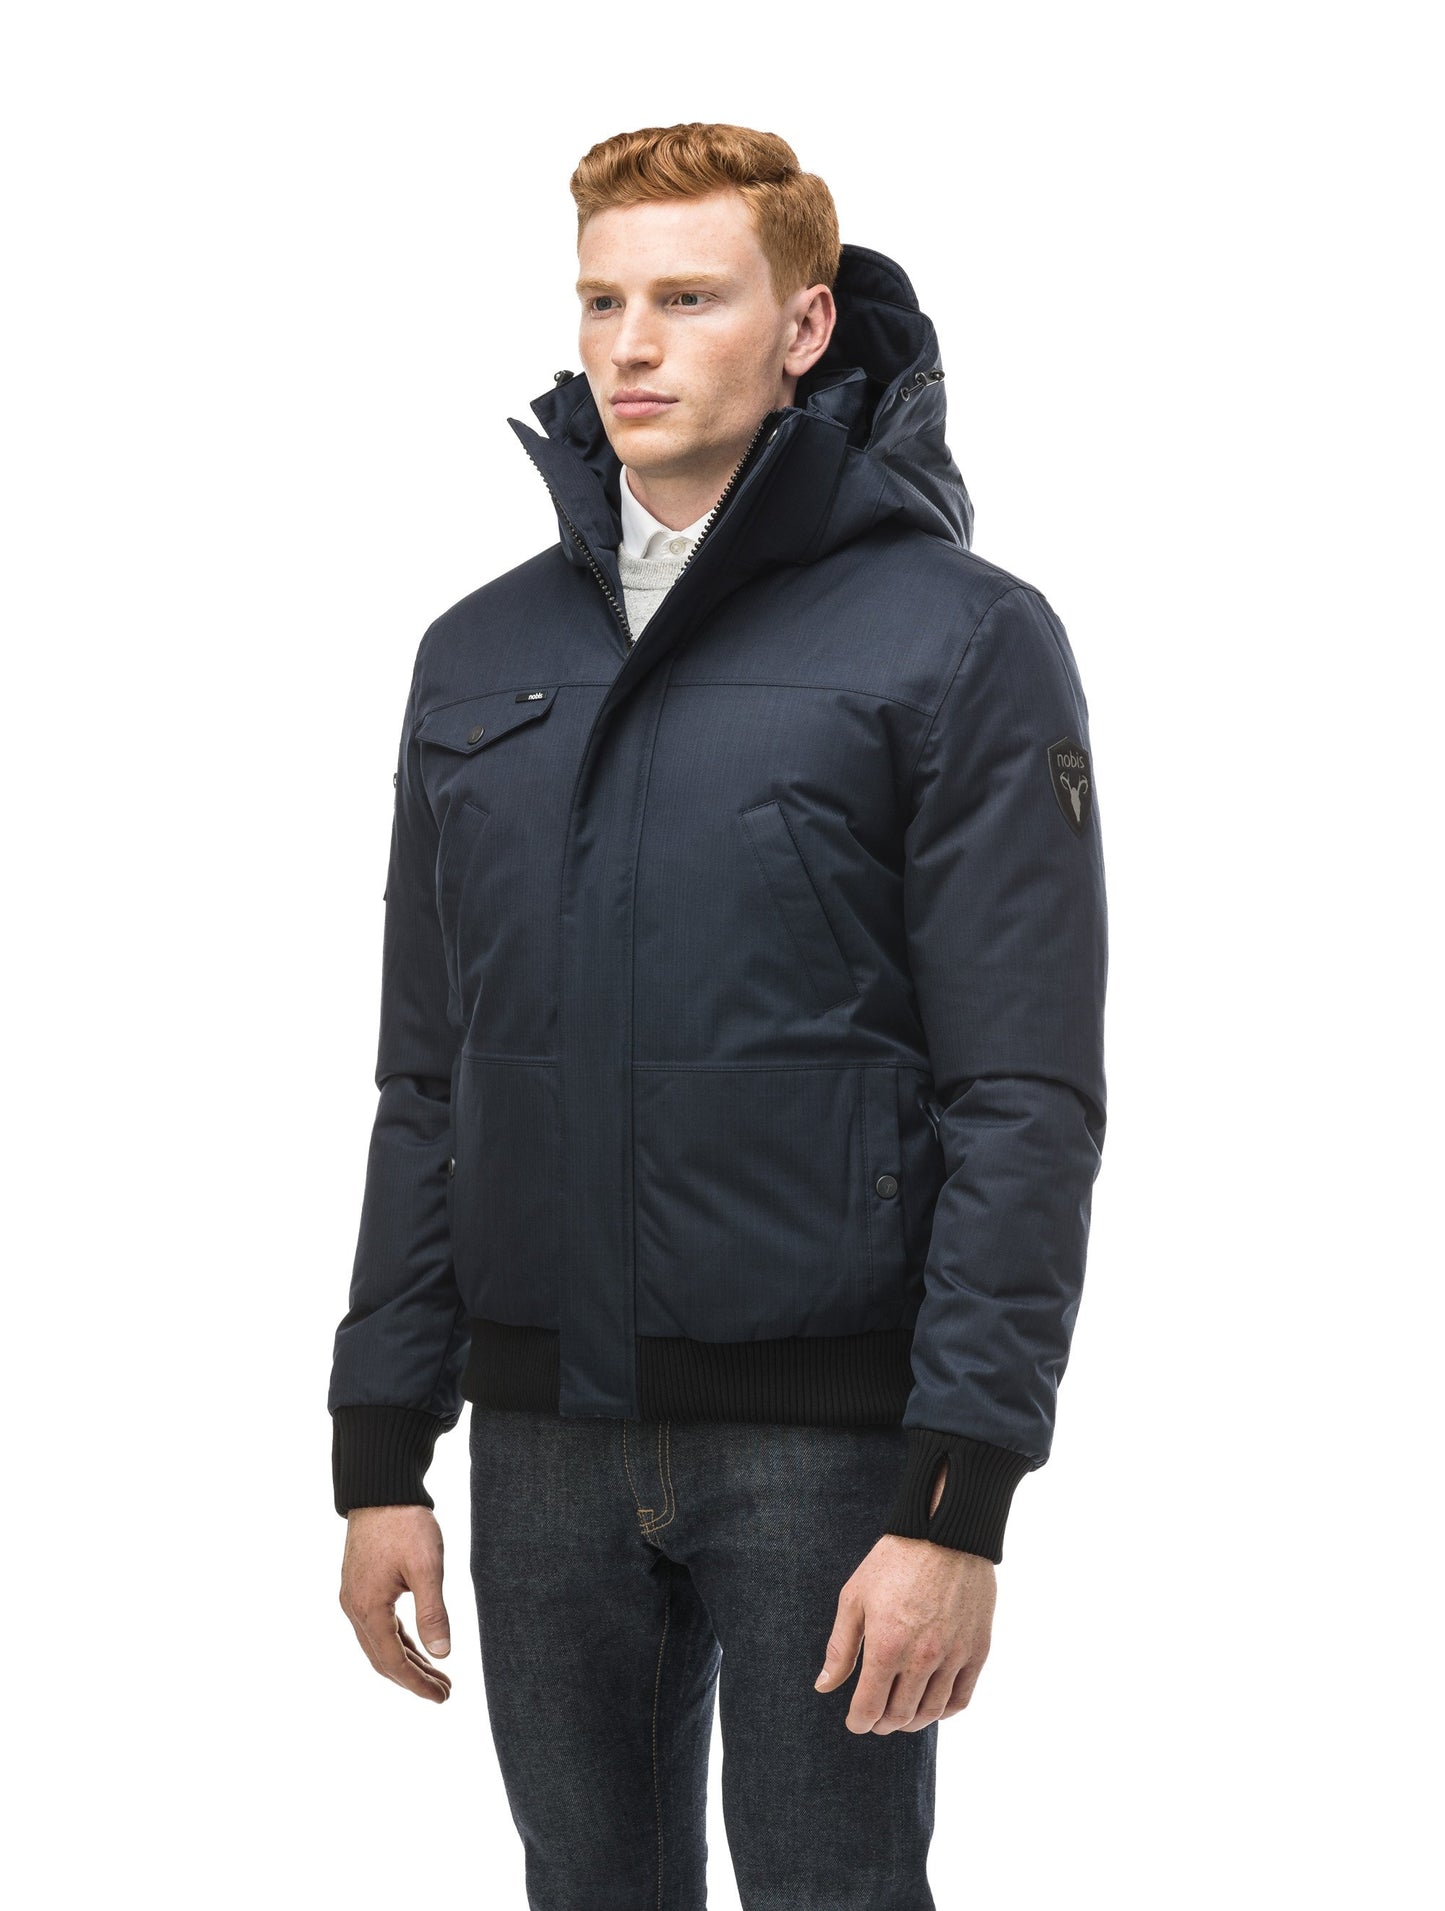 Men's sleek down filled bomber jacket with clean details and a fur free hood in CH Navy